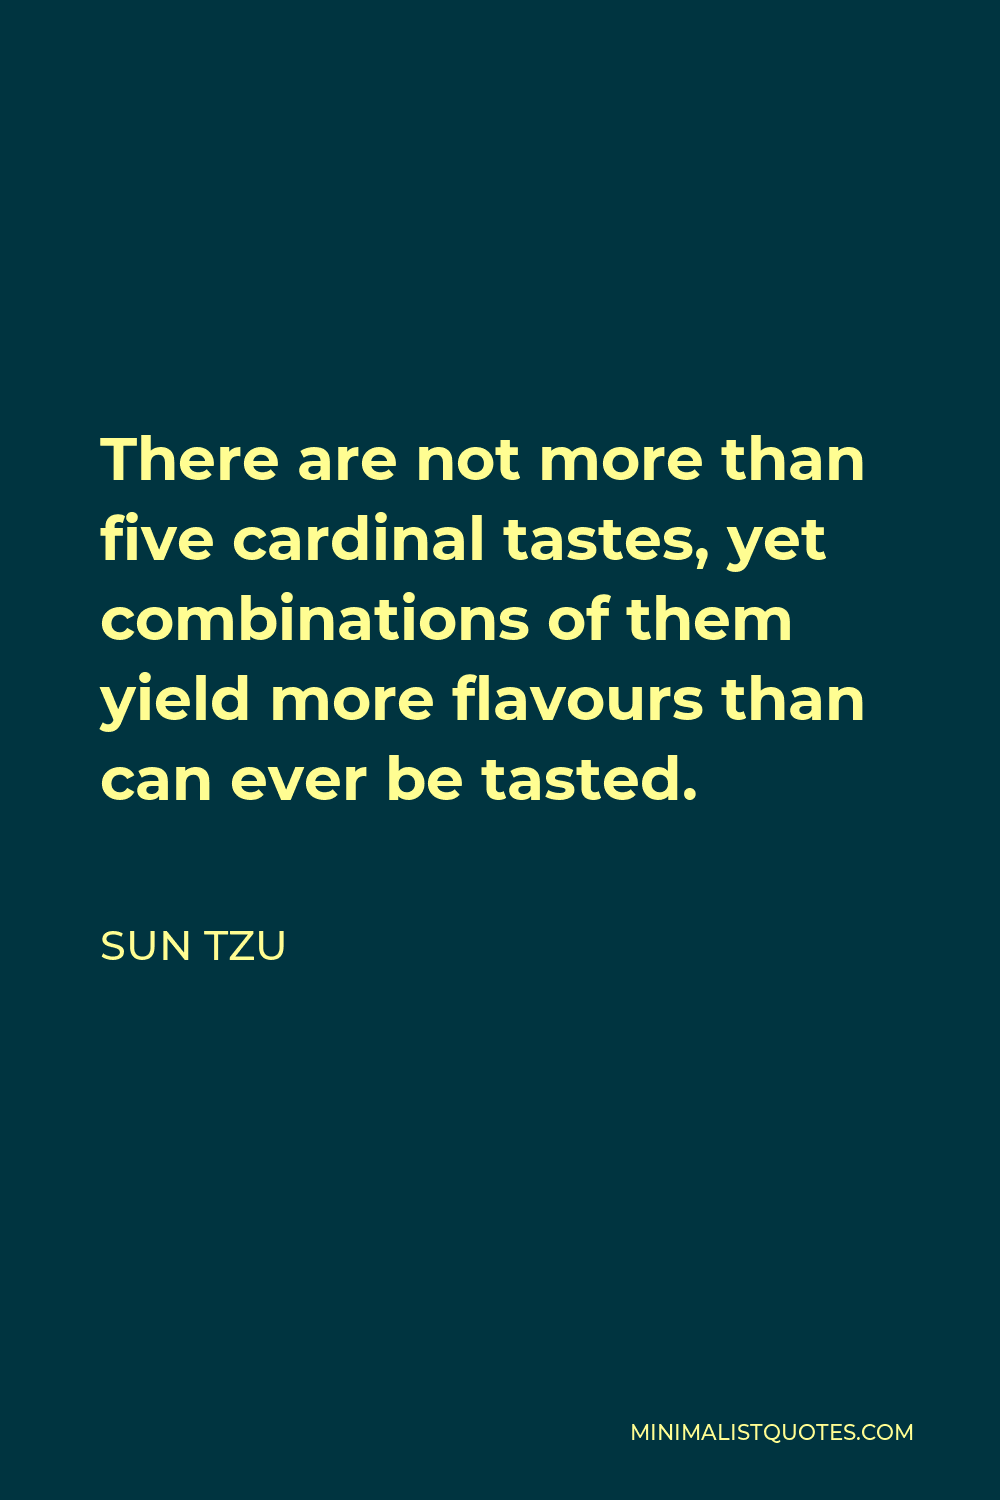 Sun Tzu Quote - There are not more than five cardinal tastes, yet combinations of them yield more flavours than can ever be tasted.